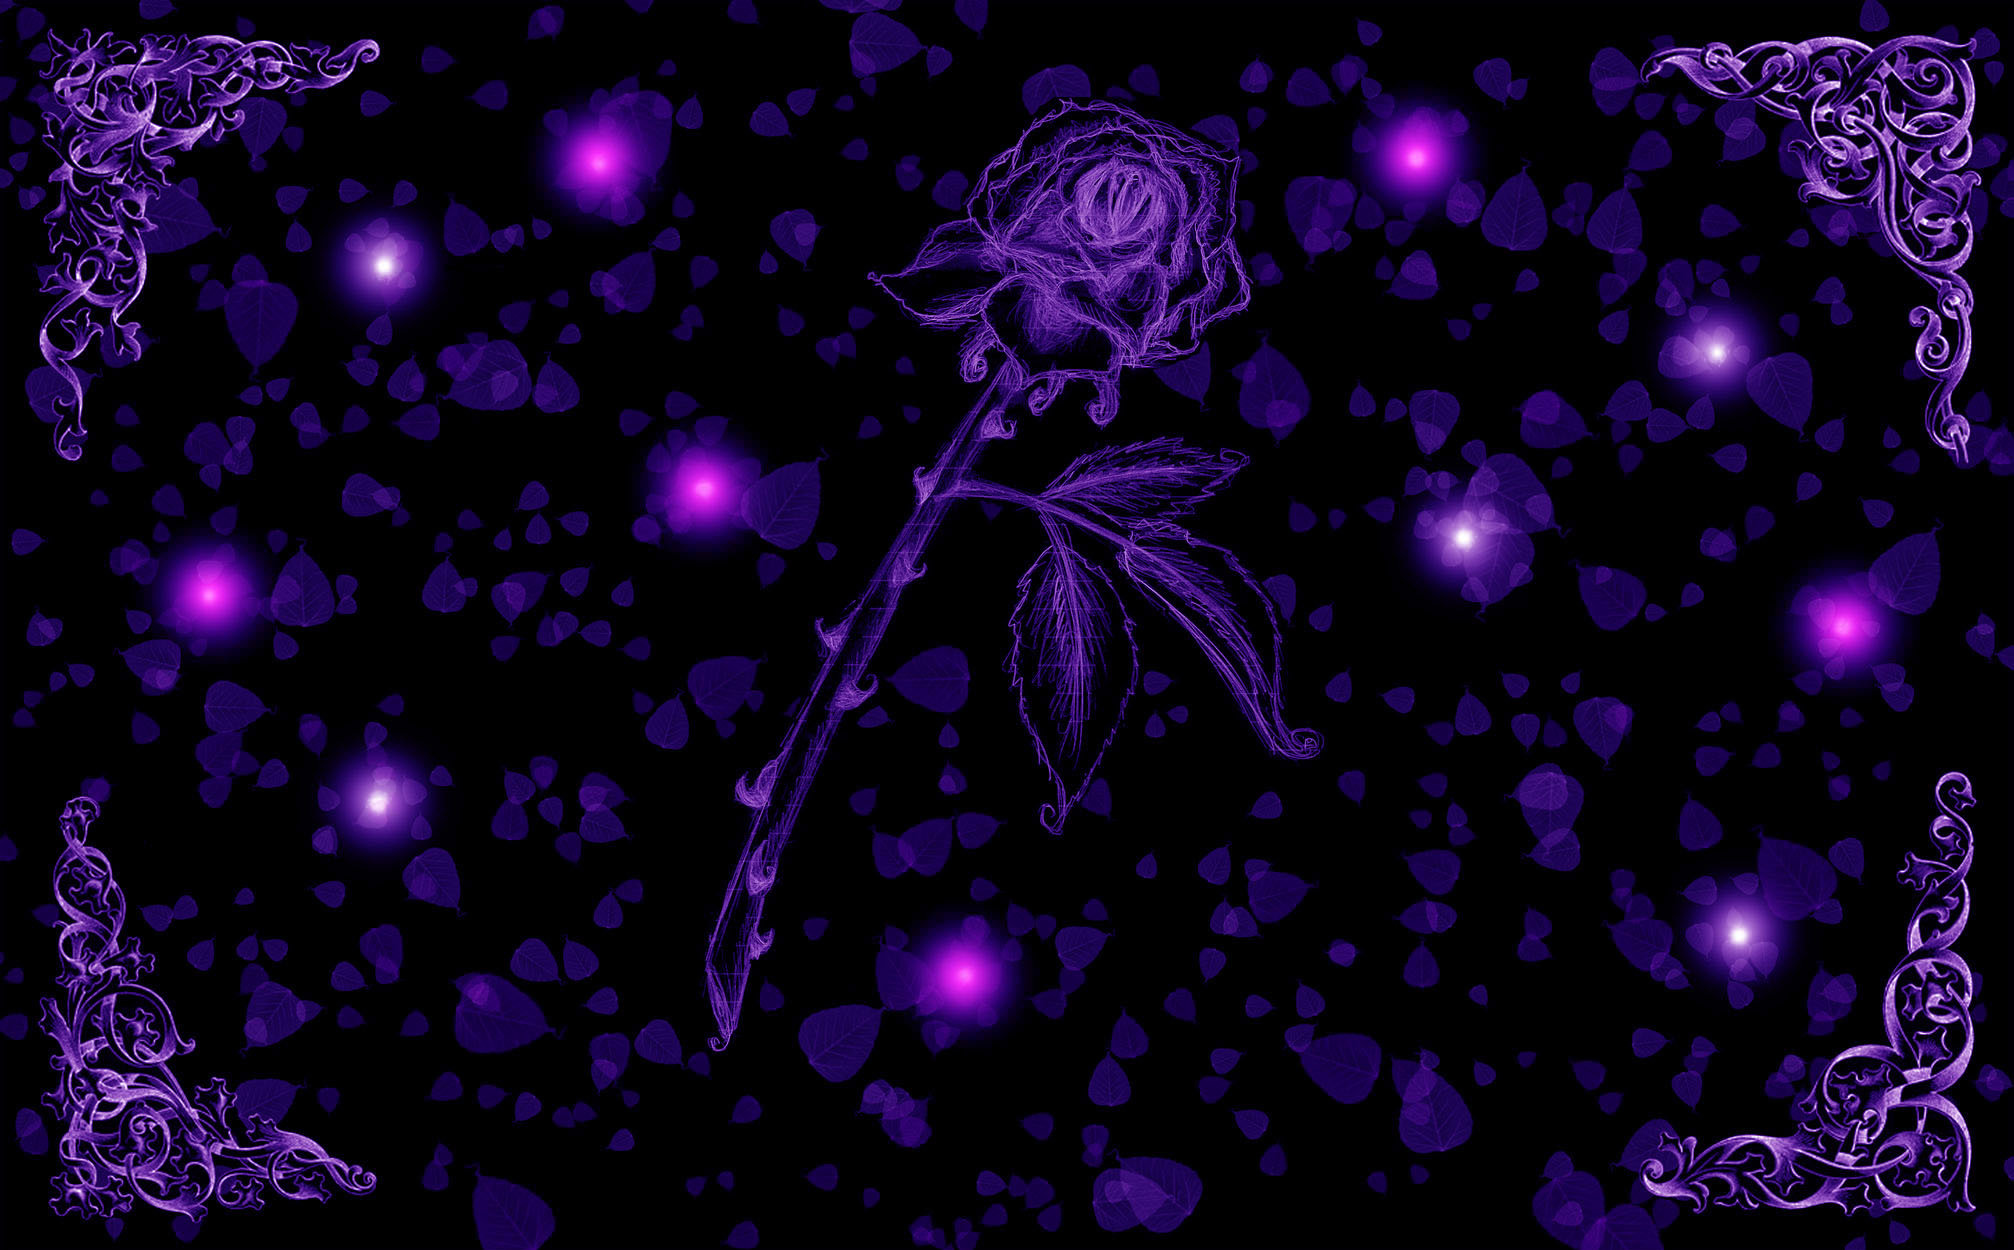 Dark Purple Rose Backgrounds Images Pictures   Becuo